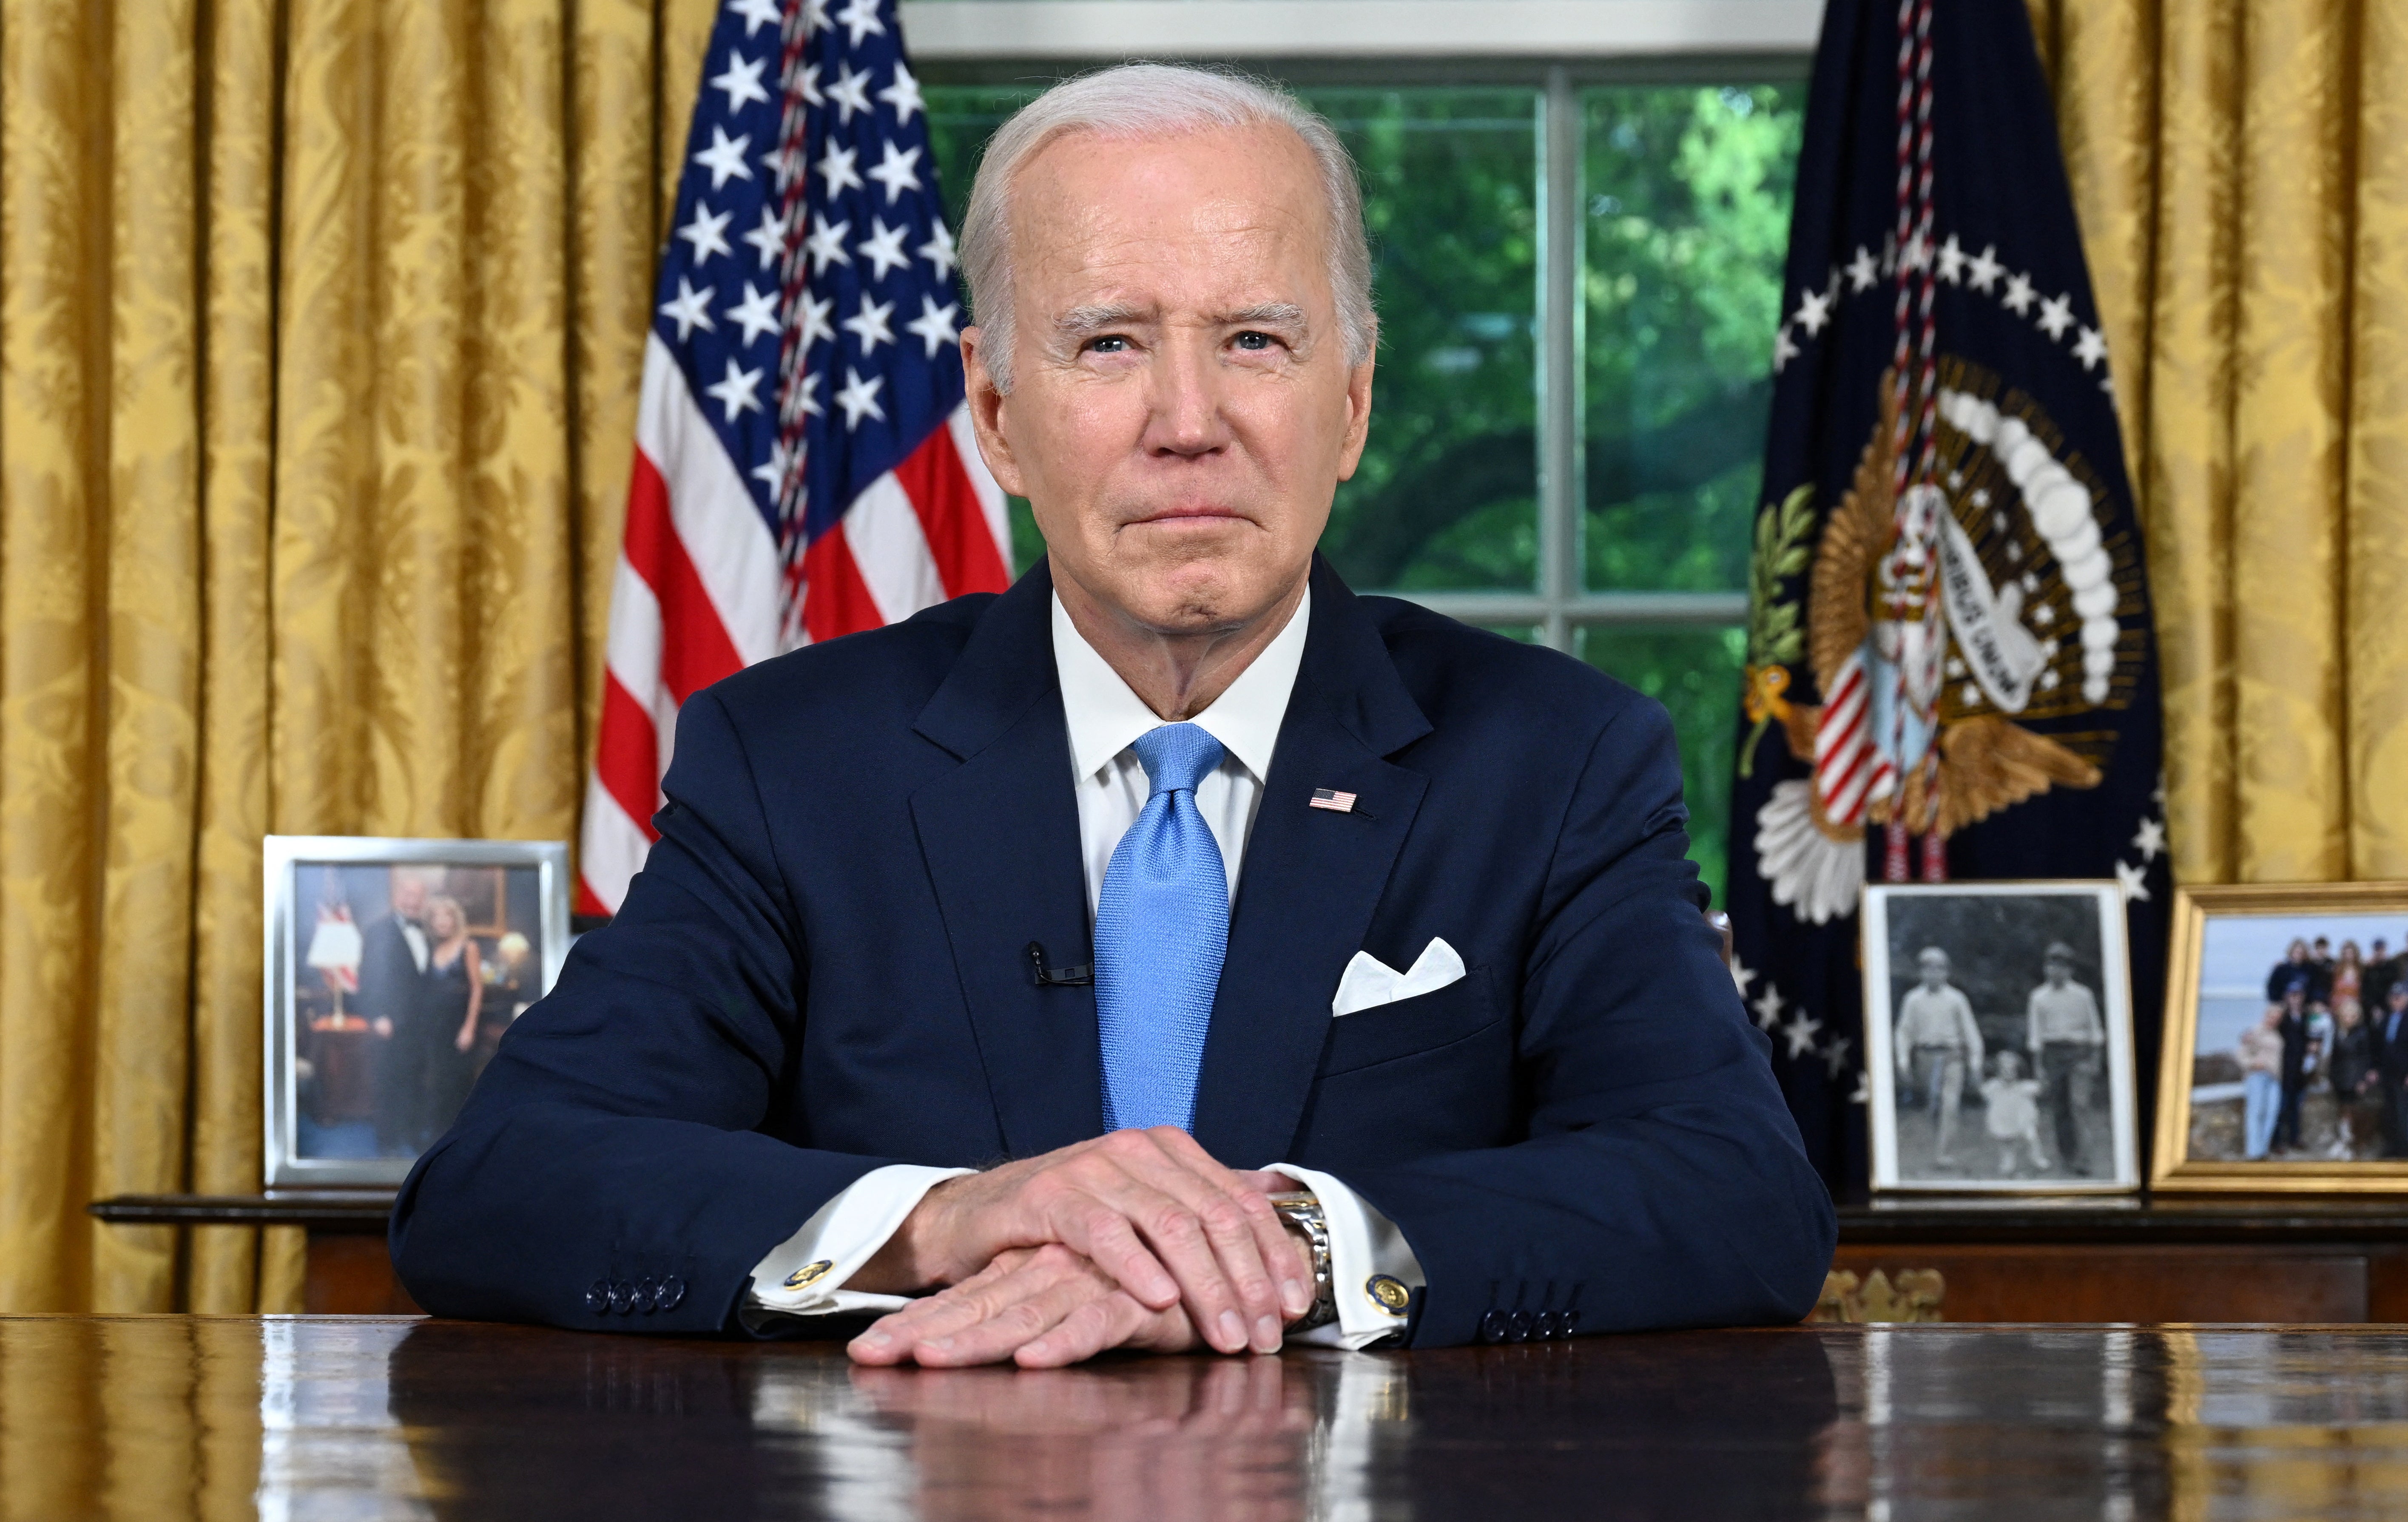 US President Joe Biden sit at his desk ahead of addressing the nation on averting default and the Bipartisan Budget Agreement, in the Oval Office of the White House in Washington, DC, June 2, 2023